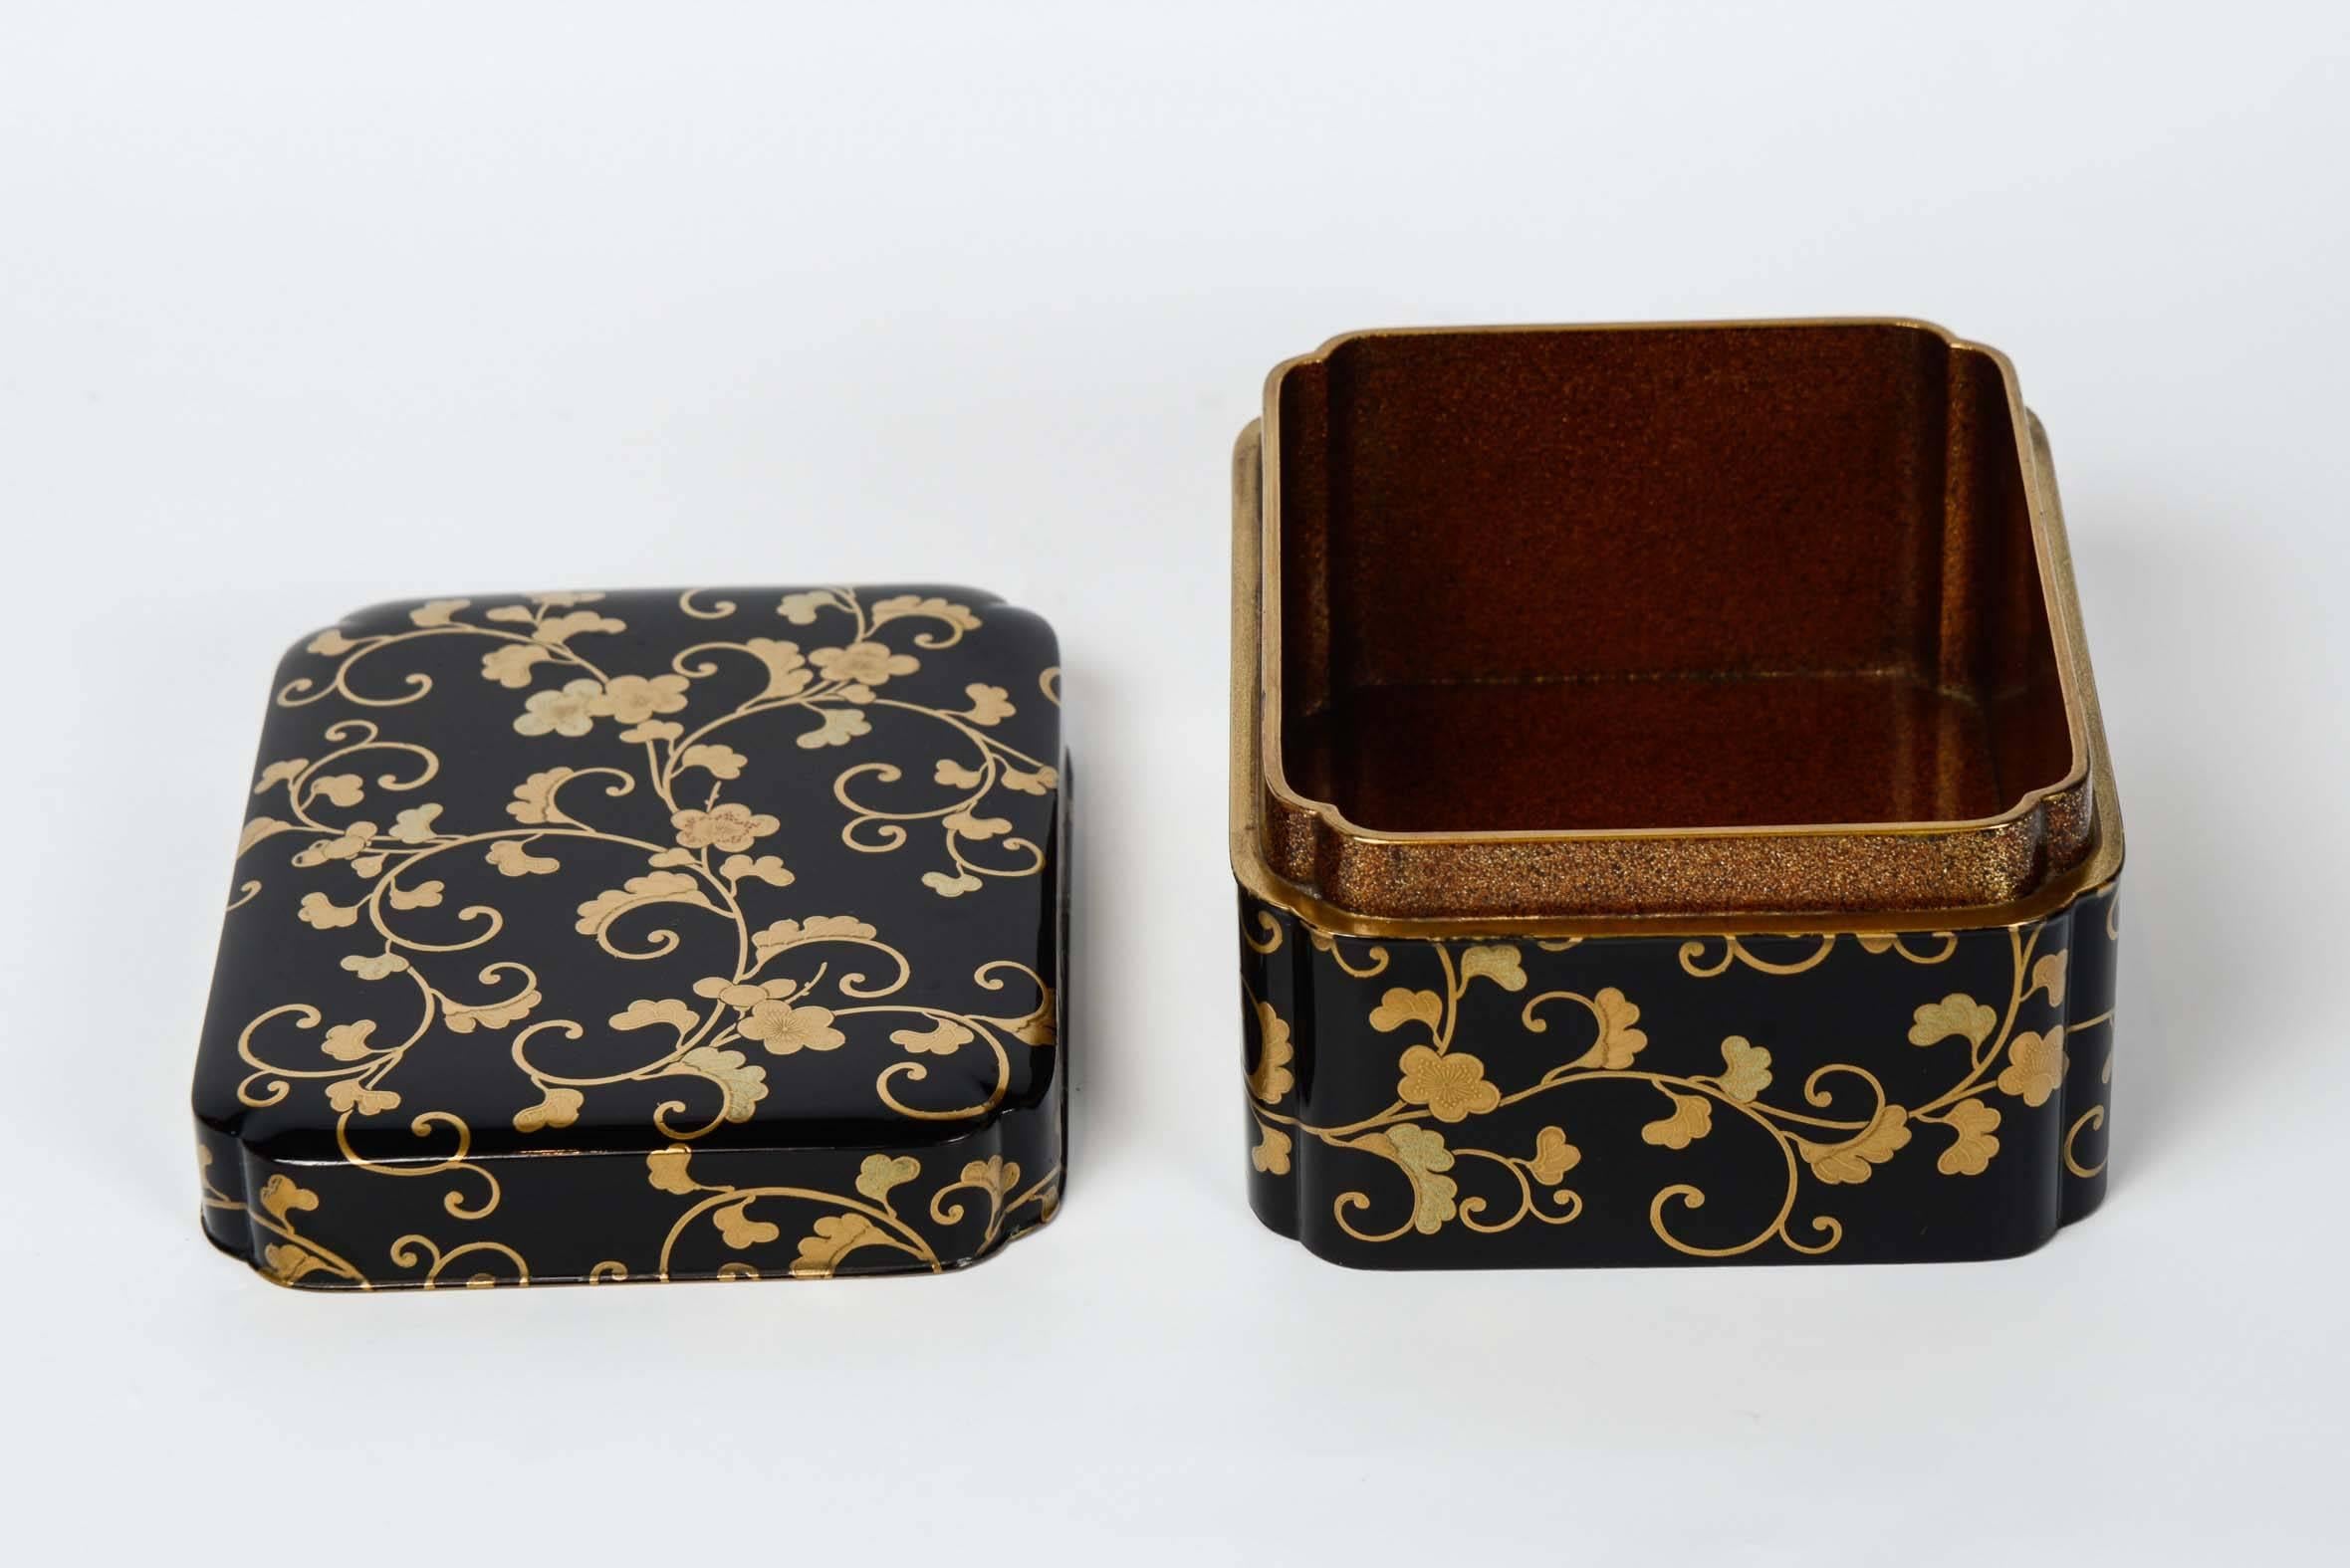 Late 19th Century 19th Century Meiji Japanese Black and Gold Lacquer Kobako (Lacquer Box)